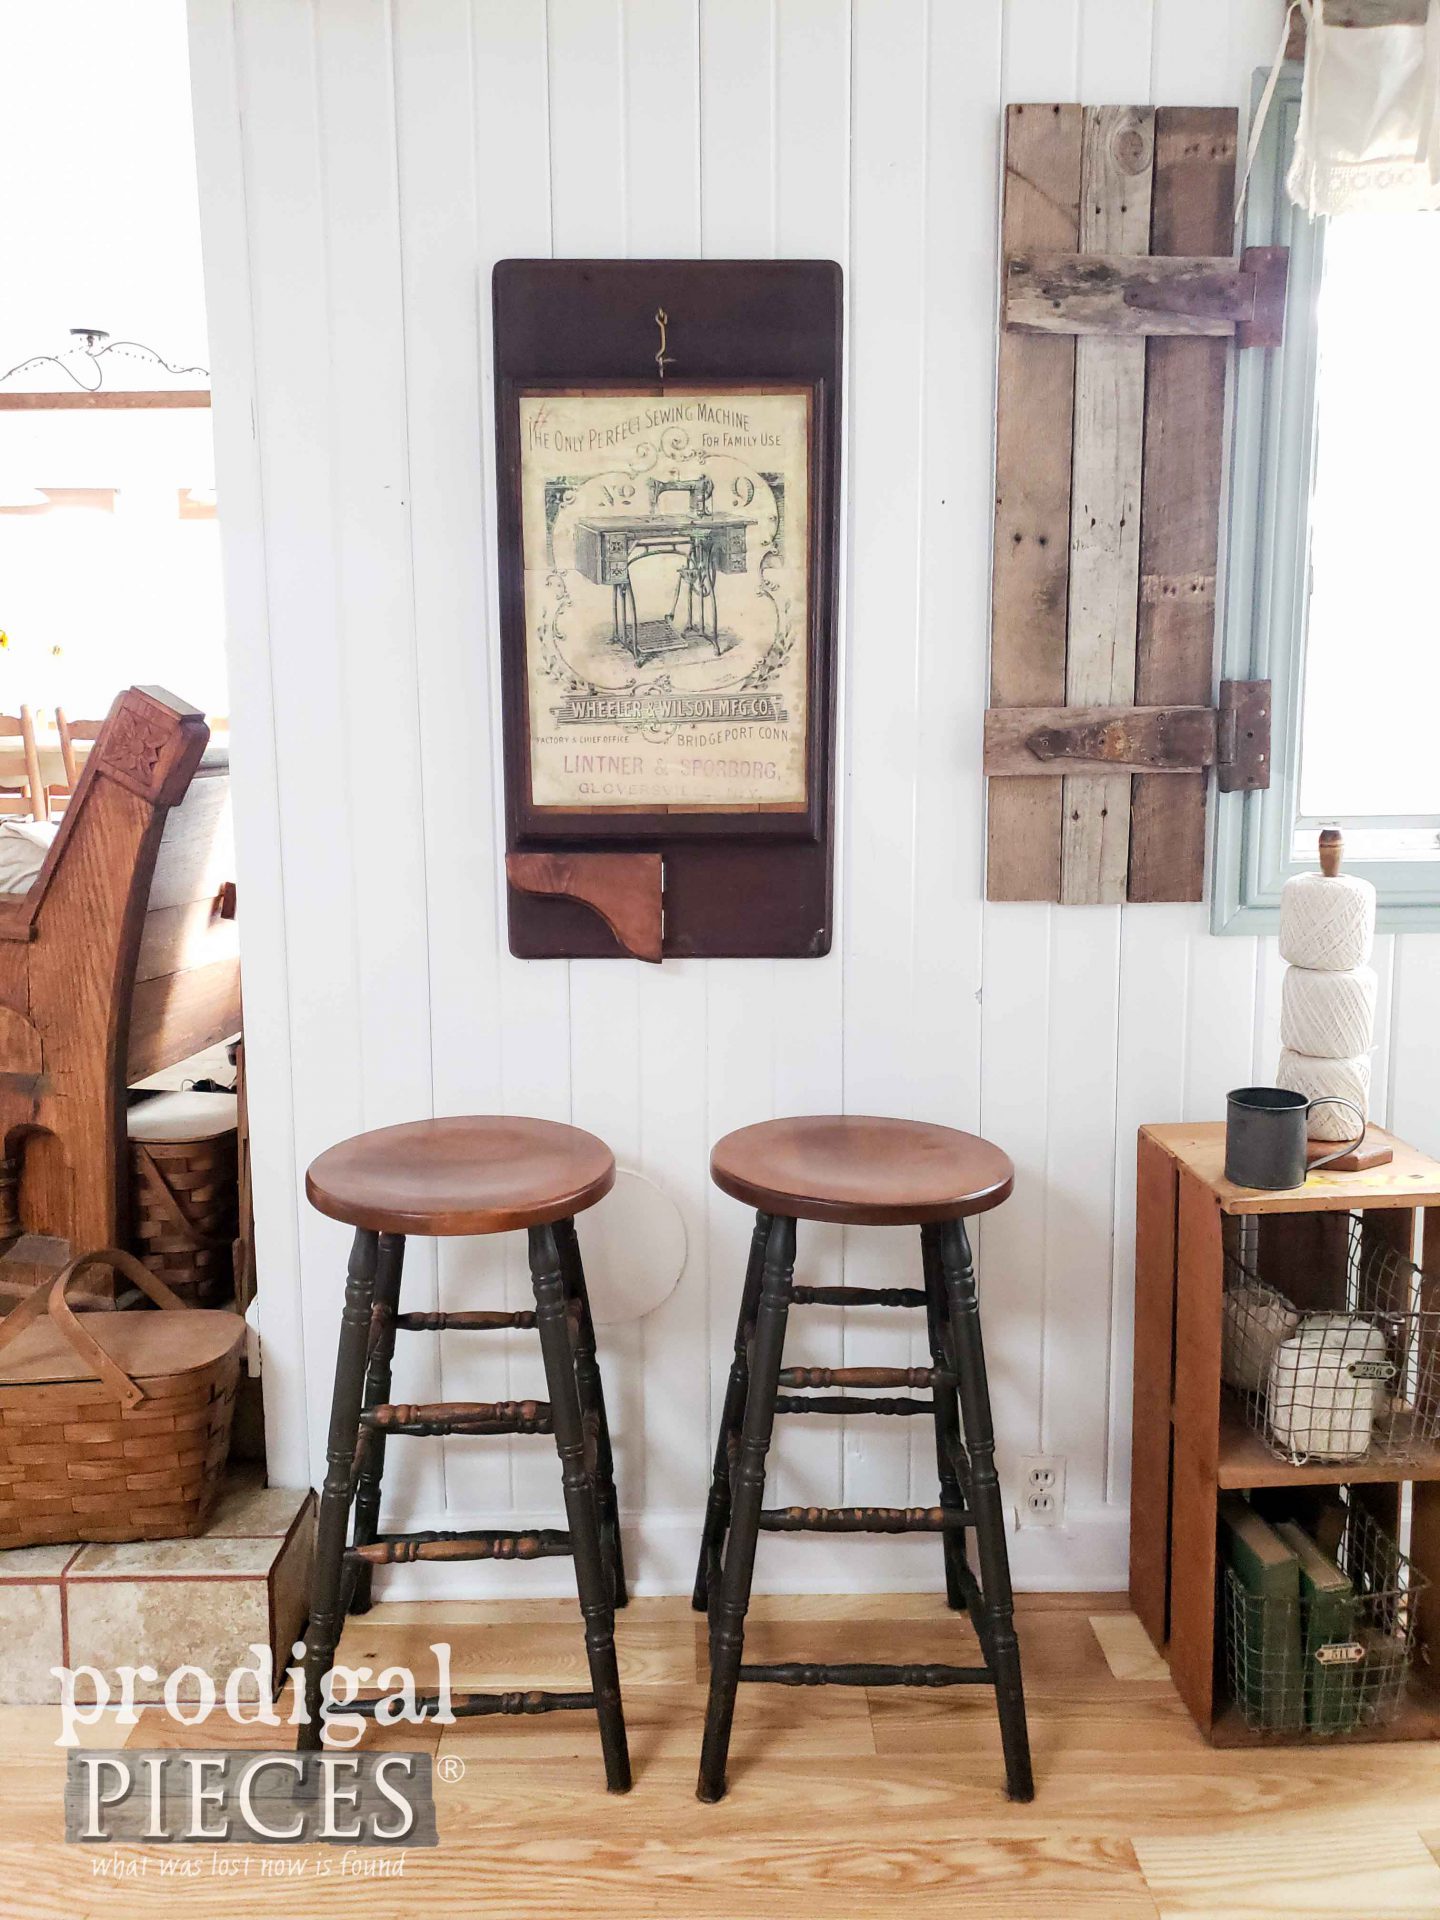 Repurposed Antique Treadle Sewing Machine Top into Game Board by Larissa of Prodigal Pieces | prodigalpieces.com #prodigalpieces #diy #home #farmhouse #homedecor #rusticchic